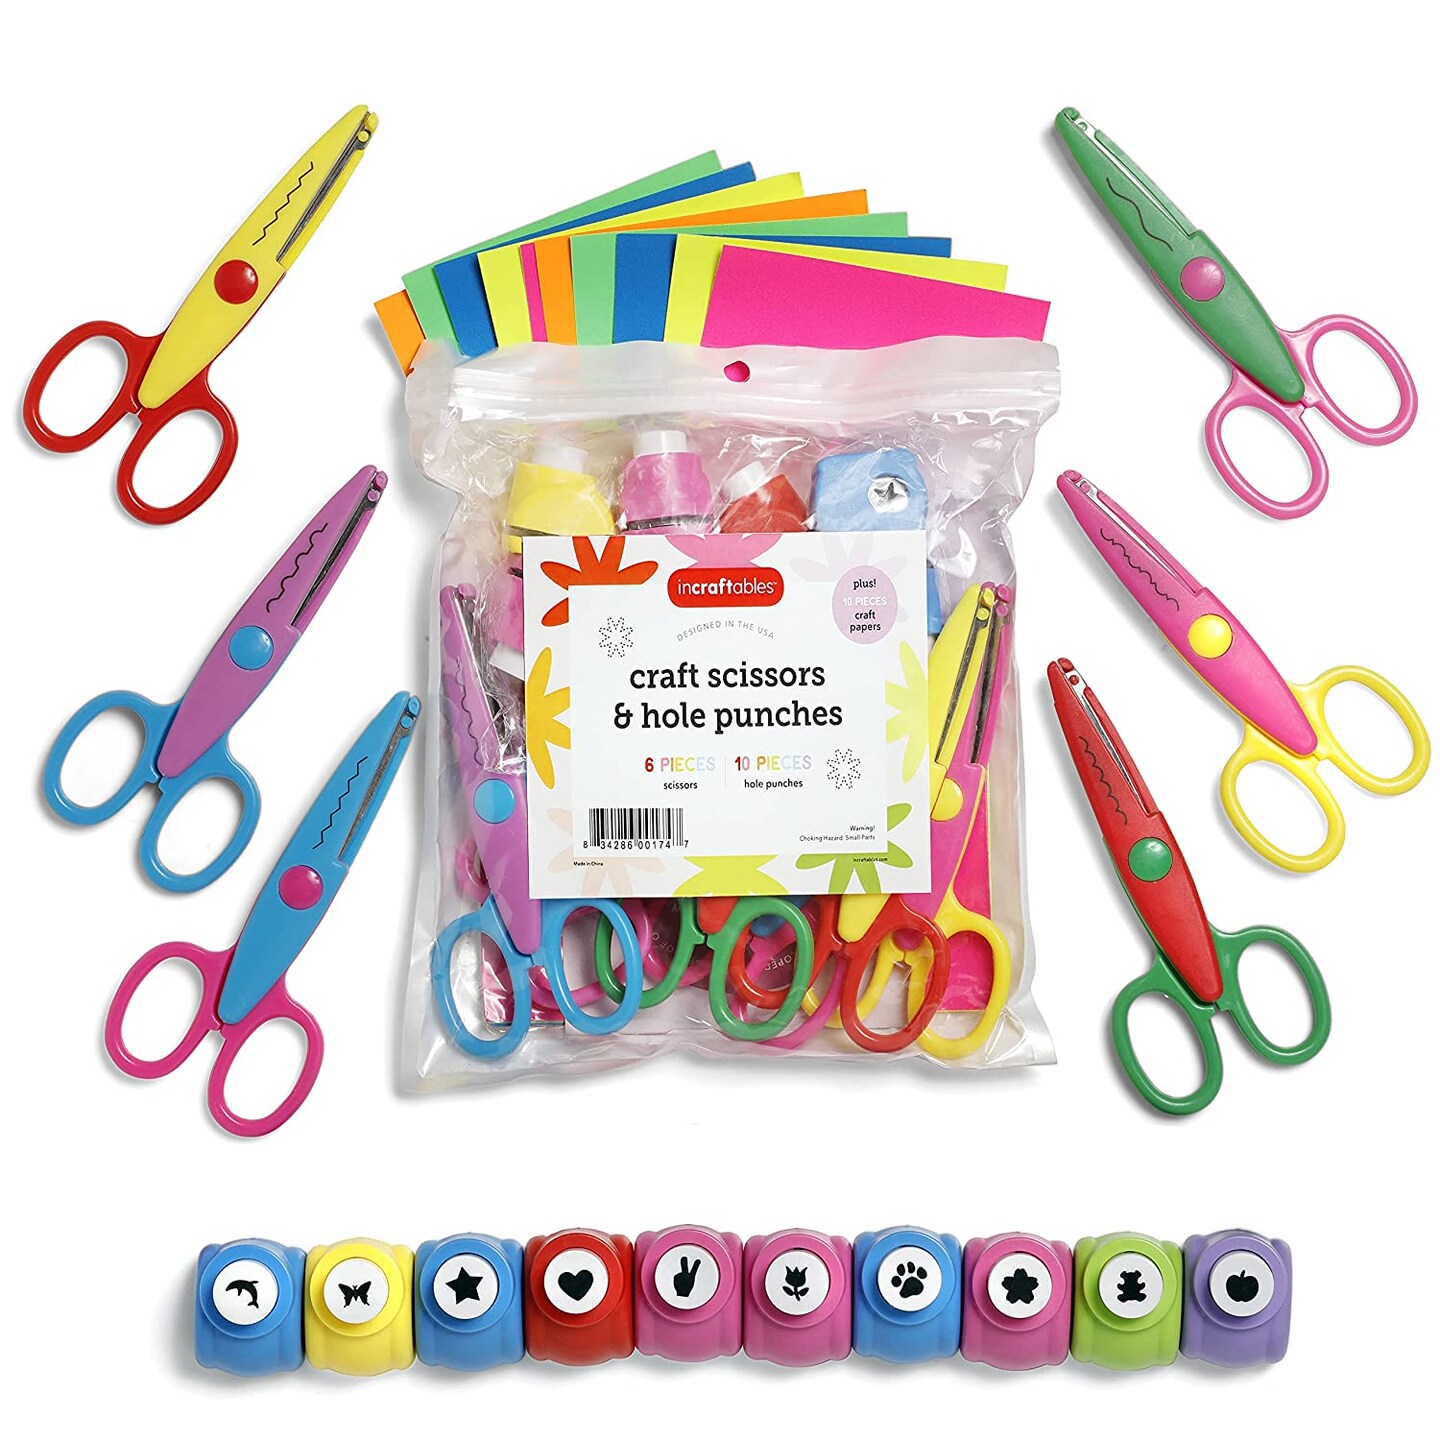 Incraftables 6pcs Decorative Pattern Edge Craft Scissors with 10pcs Small Paper Hole Punch Shapes &#x26; 10pcs Colorful Papers. Best for Fun DIY Scrapbooking &#x26; Crafting Projects for Kids &#x26; Adults